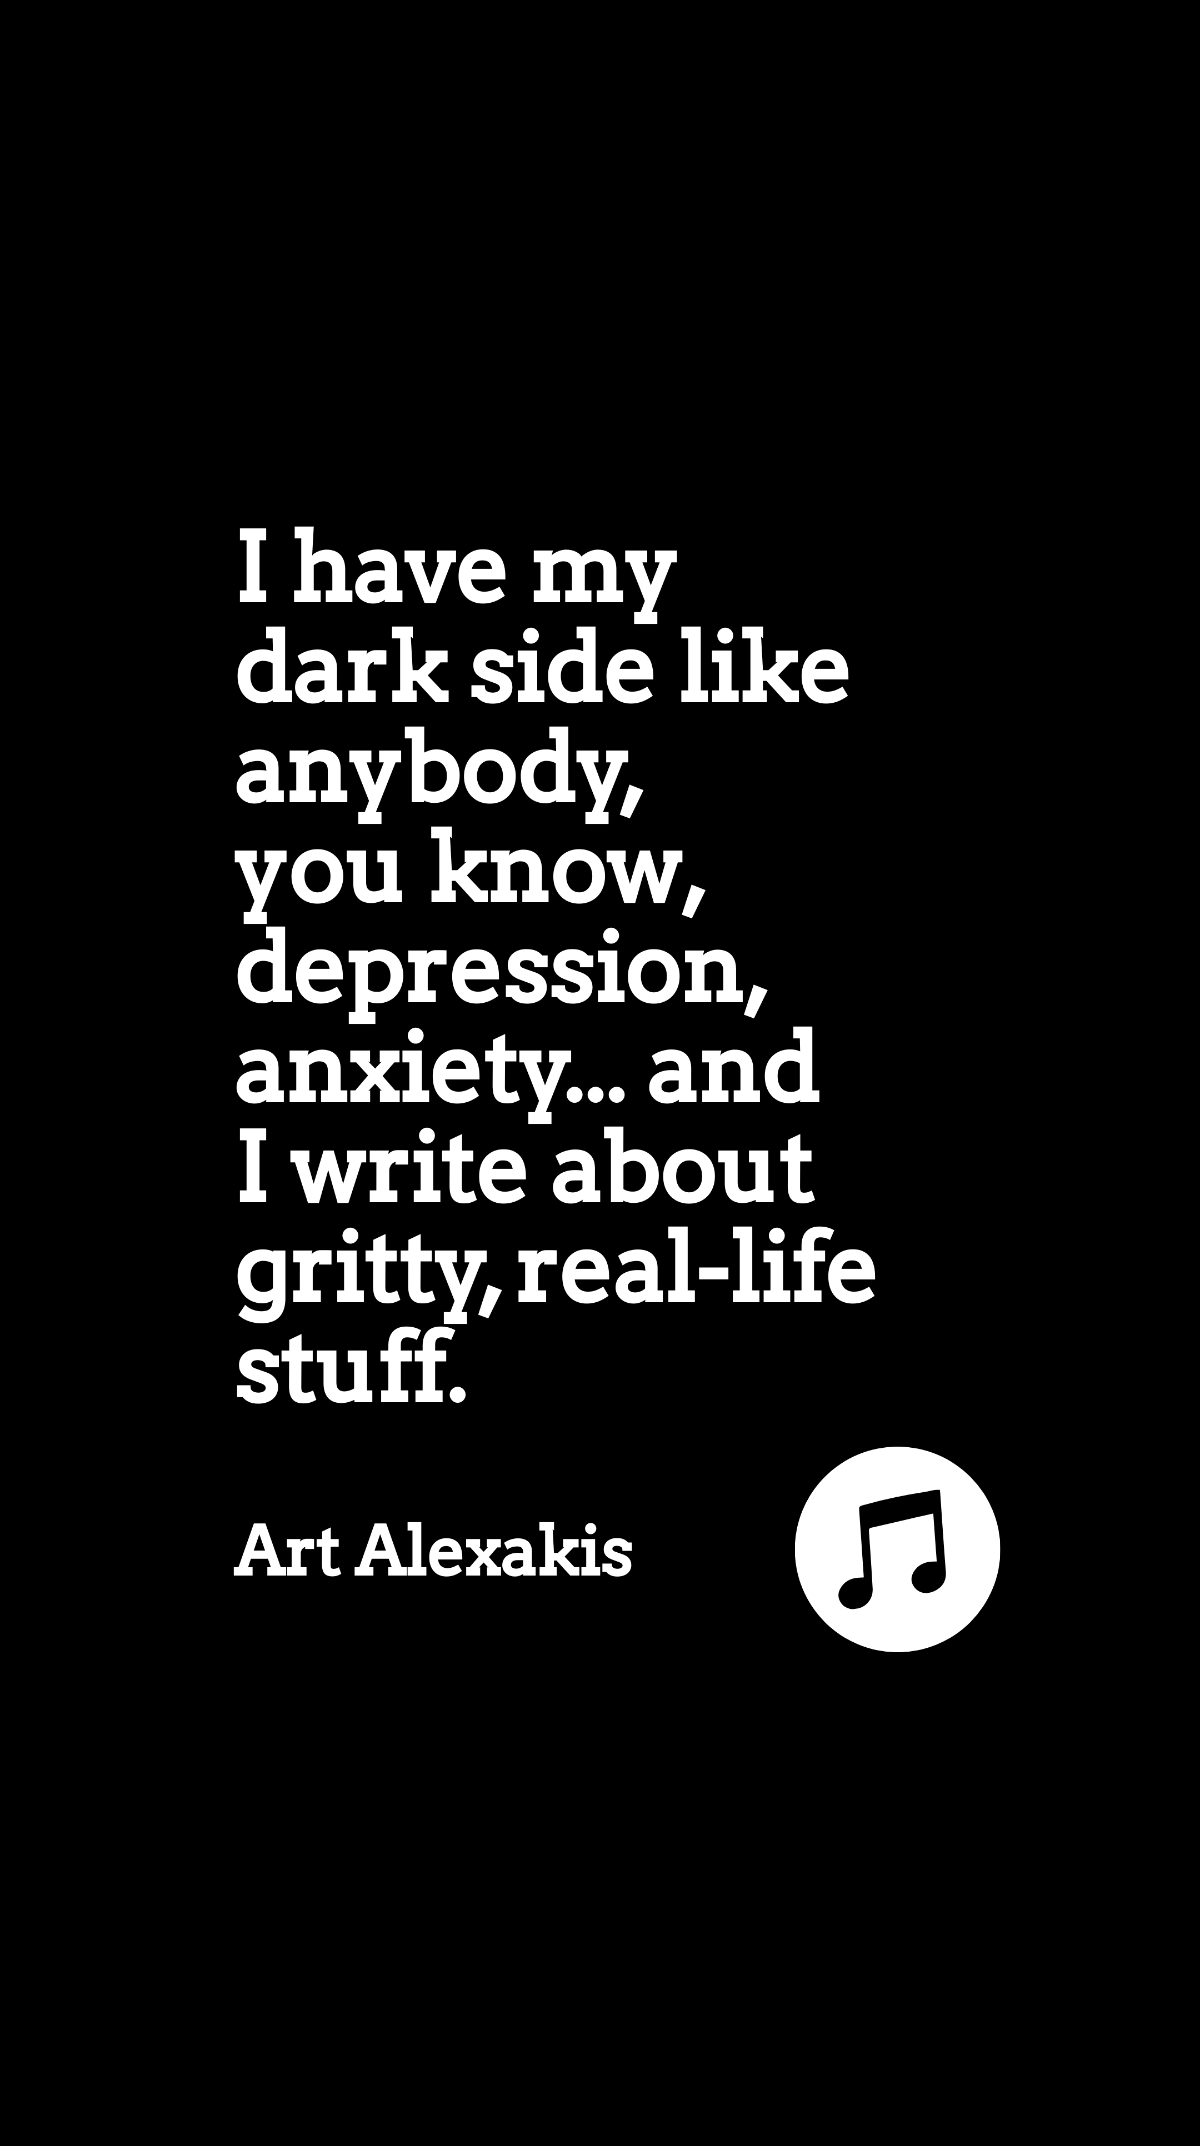 Art Alexakis - I have my dark side like anybody, you know, depression, anxiety... and I write about gritty, real-life stuff. Template